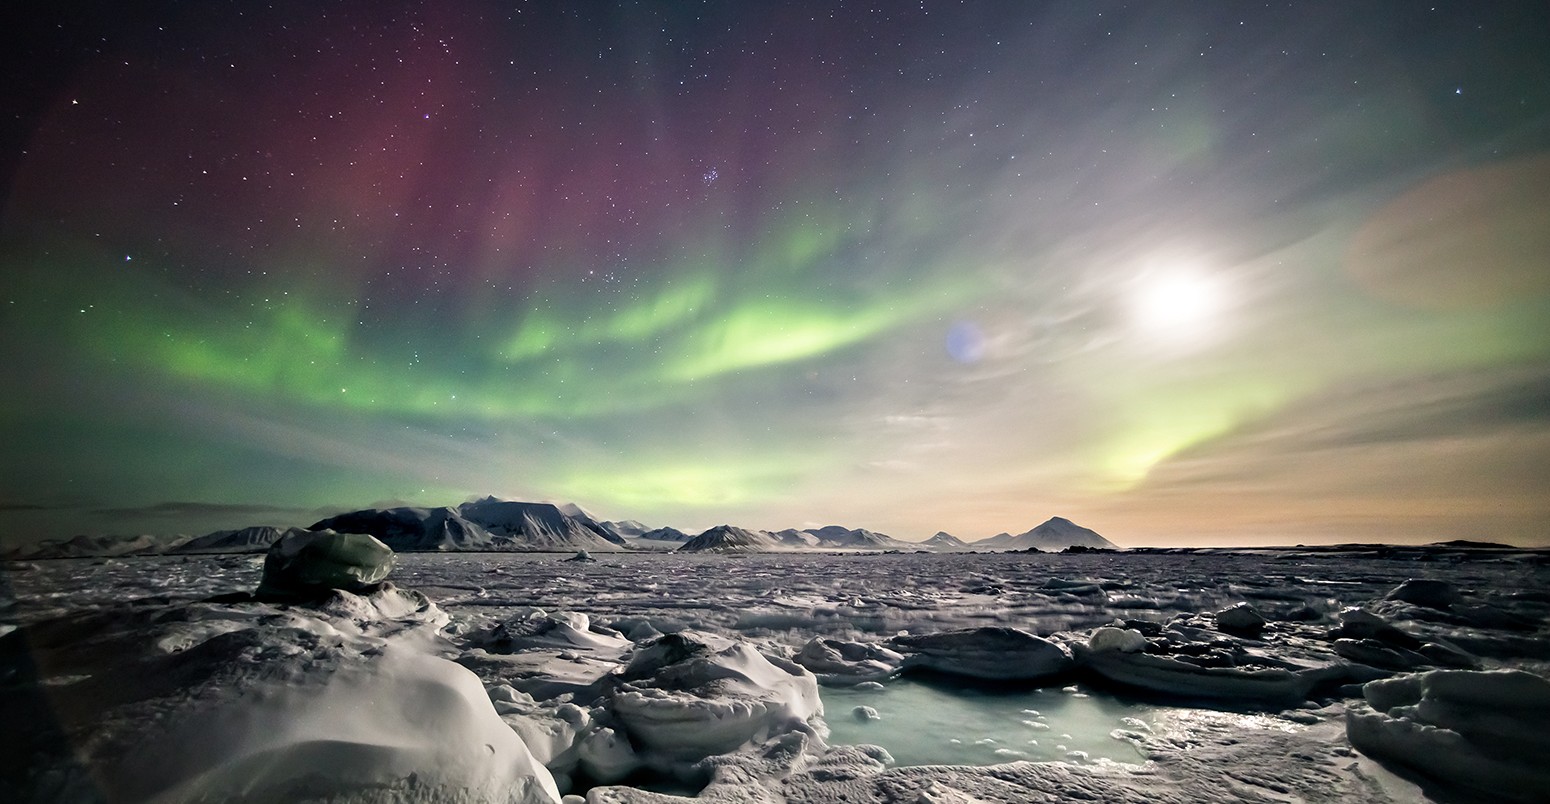 Arctic landscape with Northern Lights